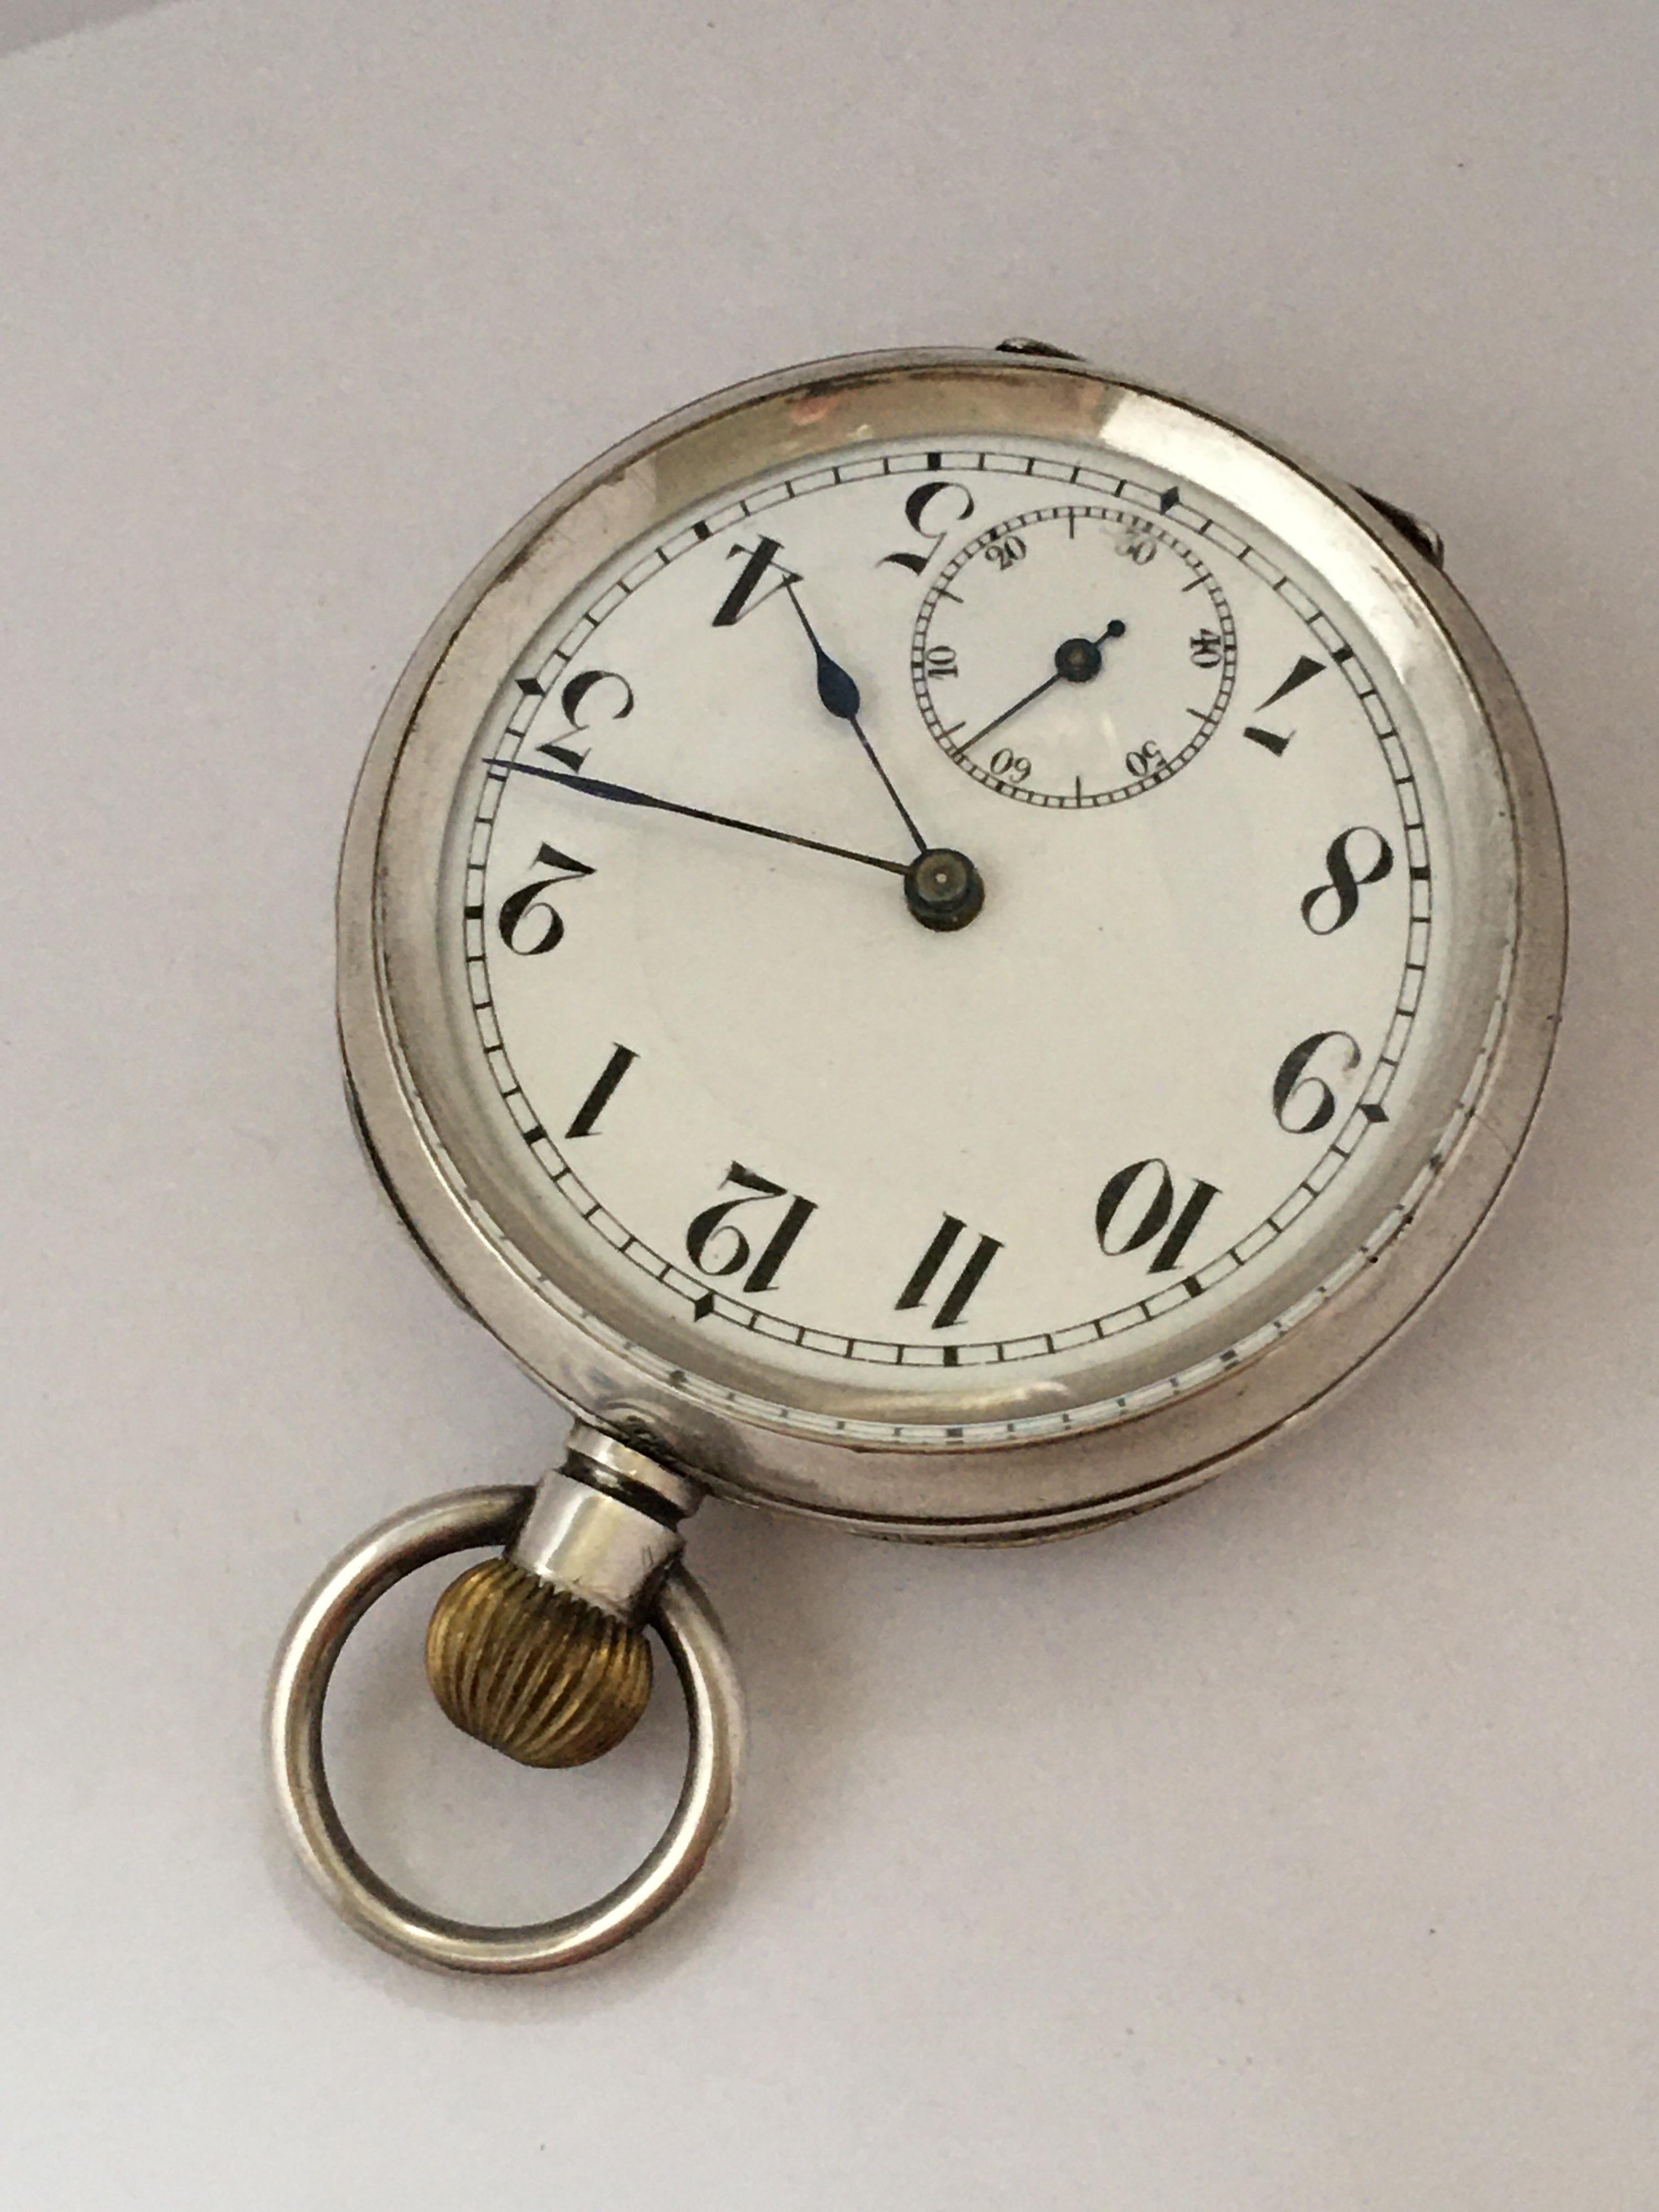 This beautiful antique silver pocket watch is in good working condition and it is running well. Visible tiny scratches and tiny dents on the back case as shown. 

Please study the images carefully as form part of the description.